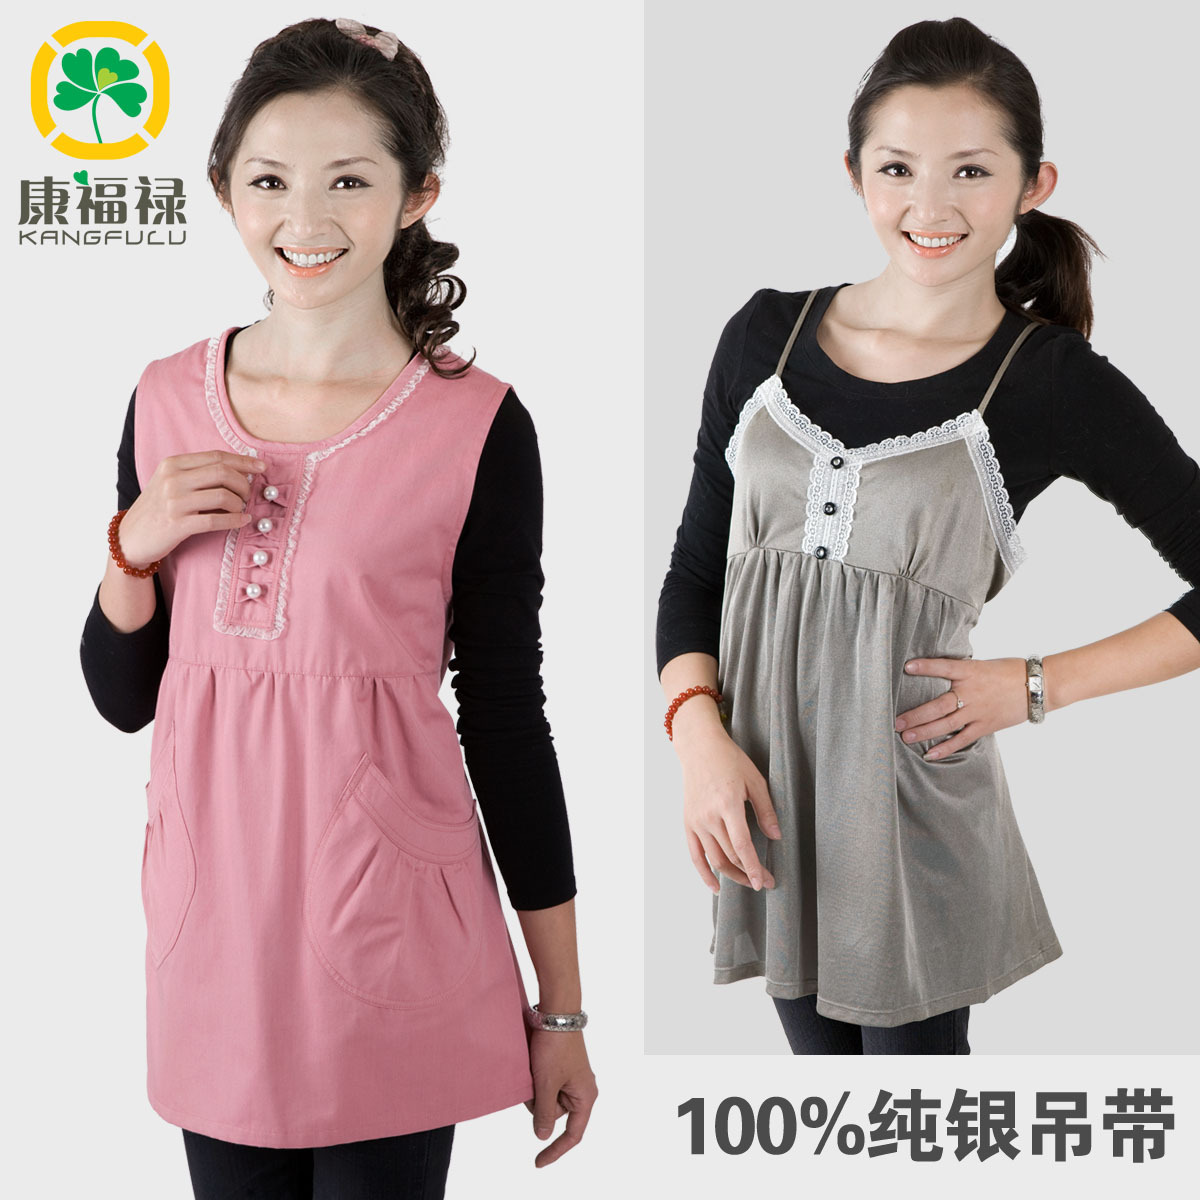 Quality radiation-resistant maternity clothing vest pure silver fiber spaghetti strap set superacids protection